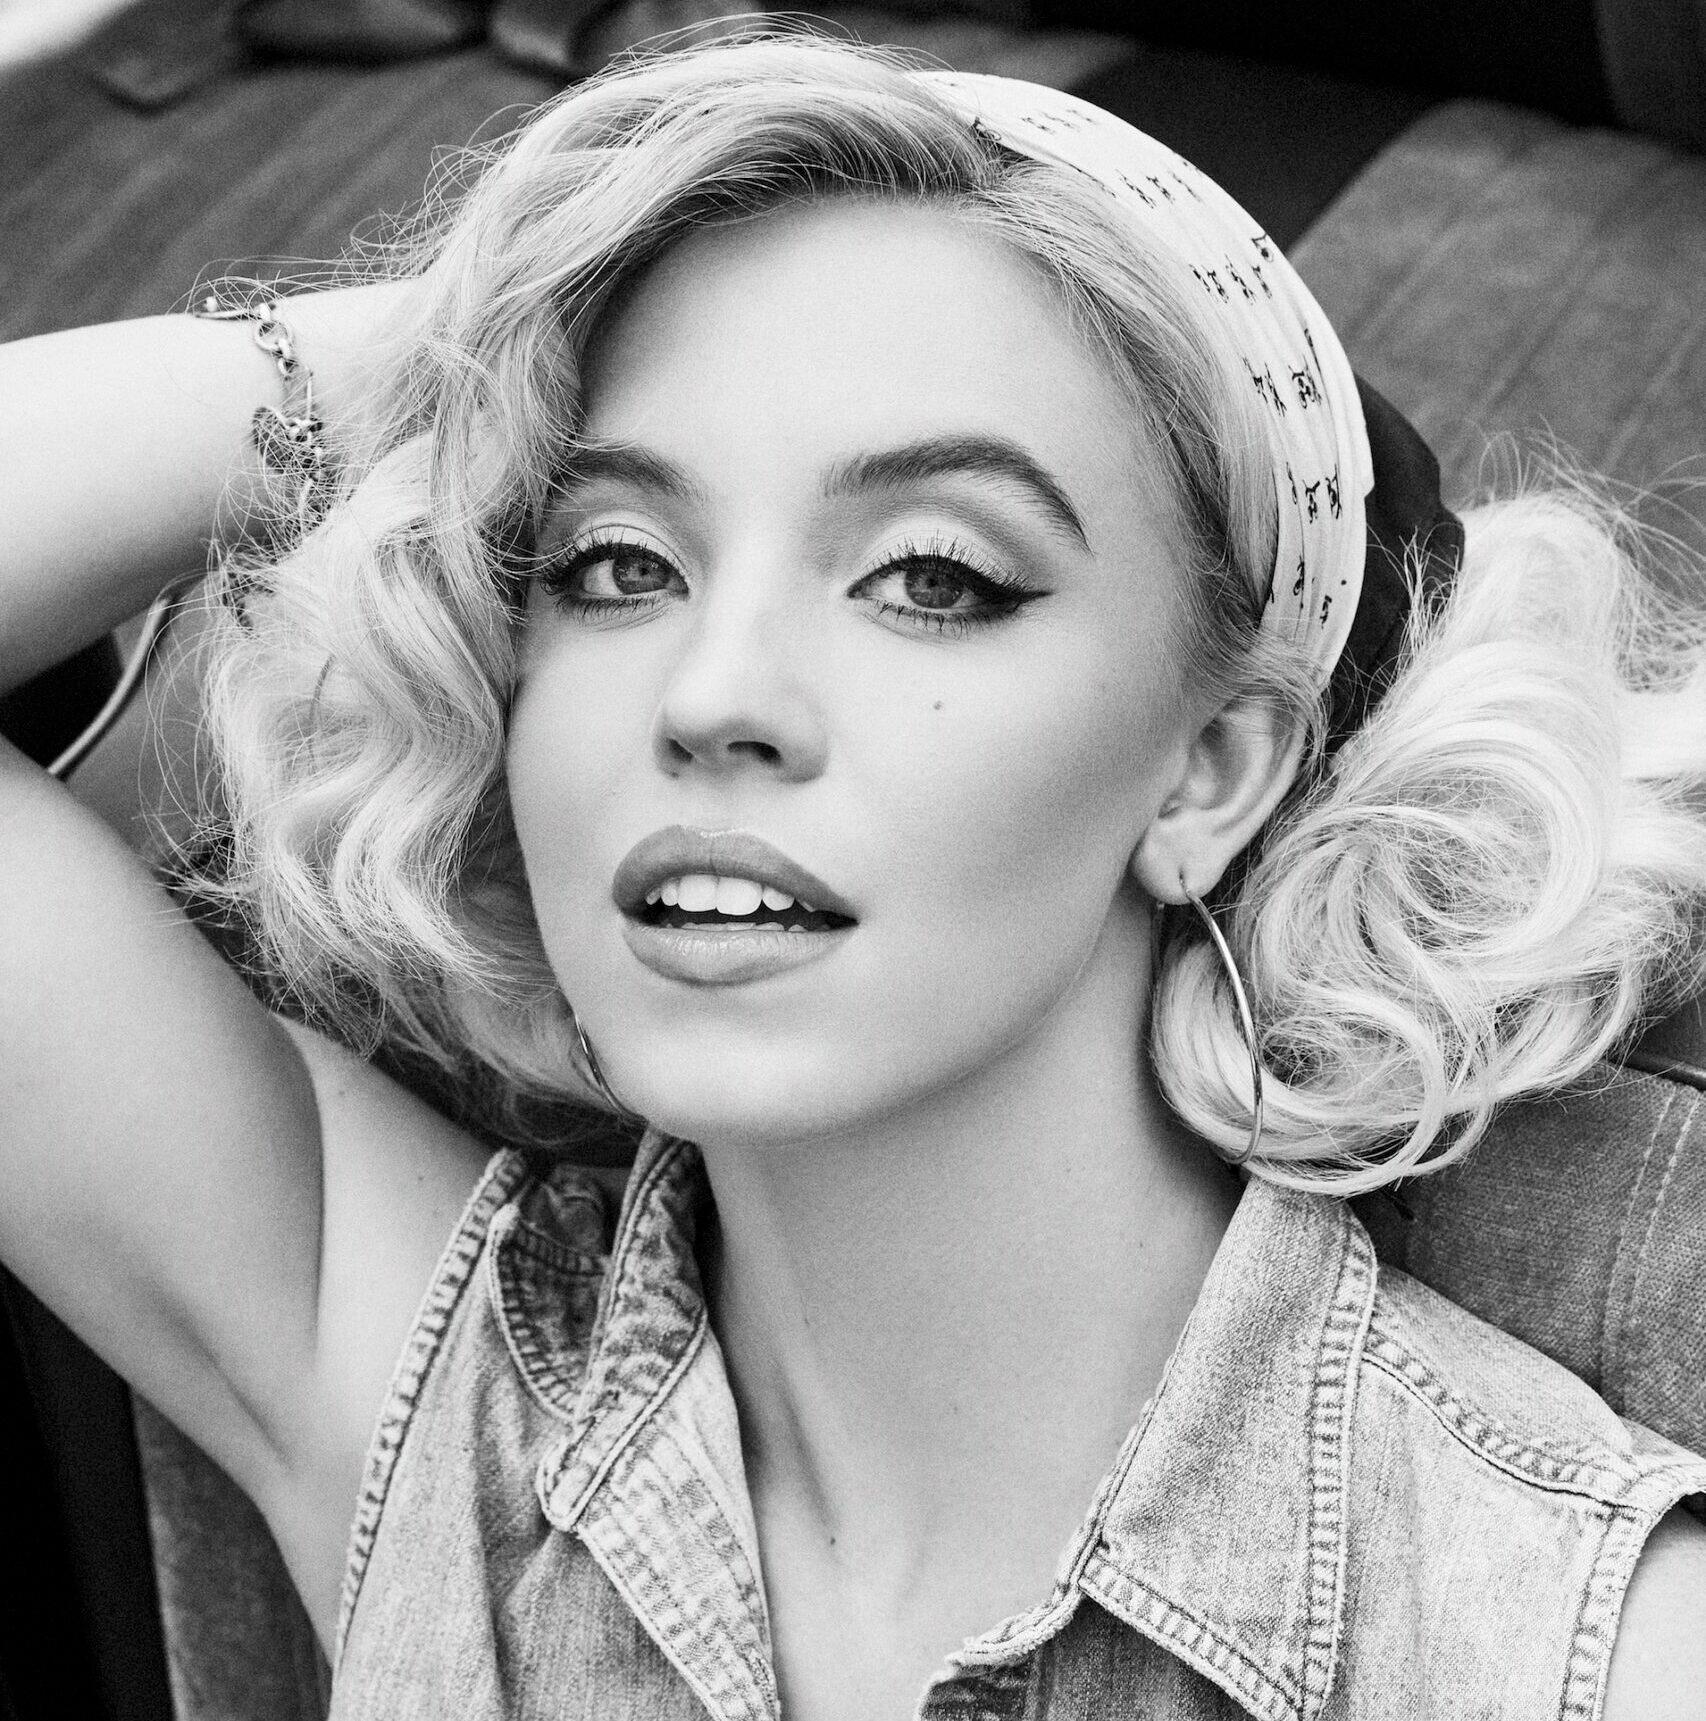 White Lotus star Sydney Sweeney is seen here channeling Anna Nicole Smith as the face of a new capsule collection for GUESS Originals.